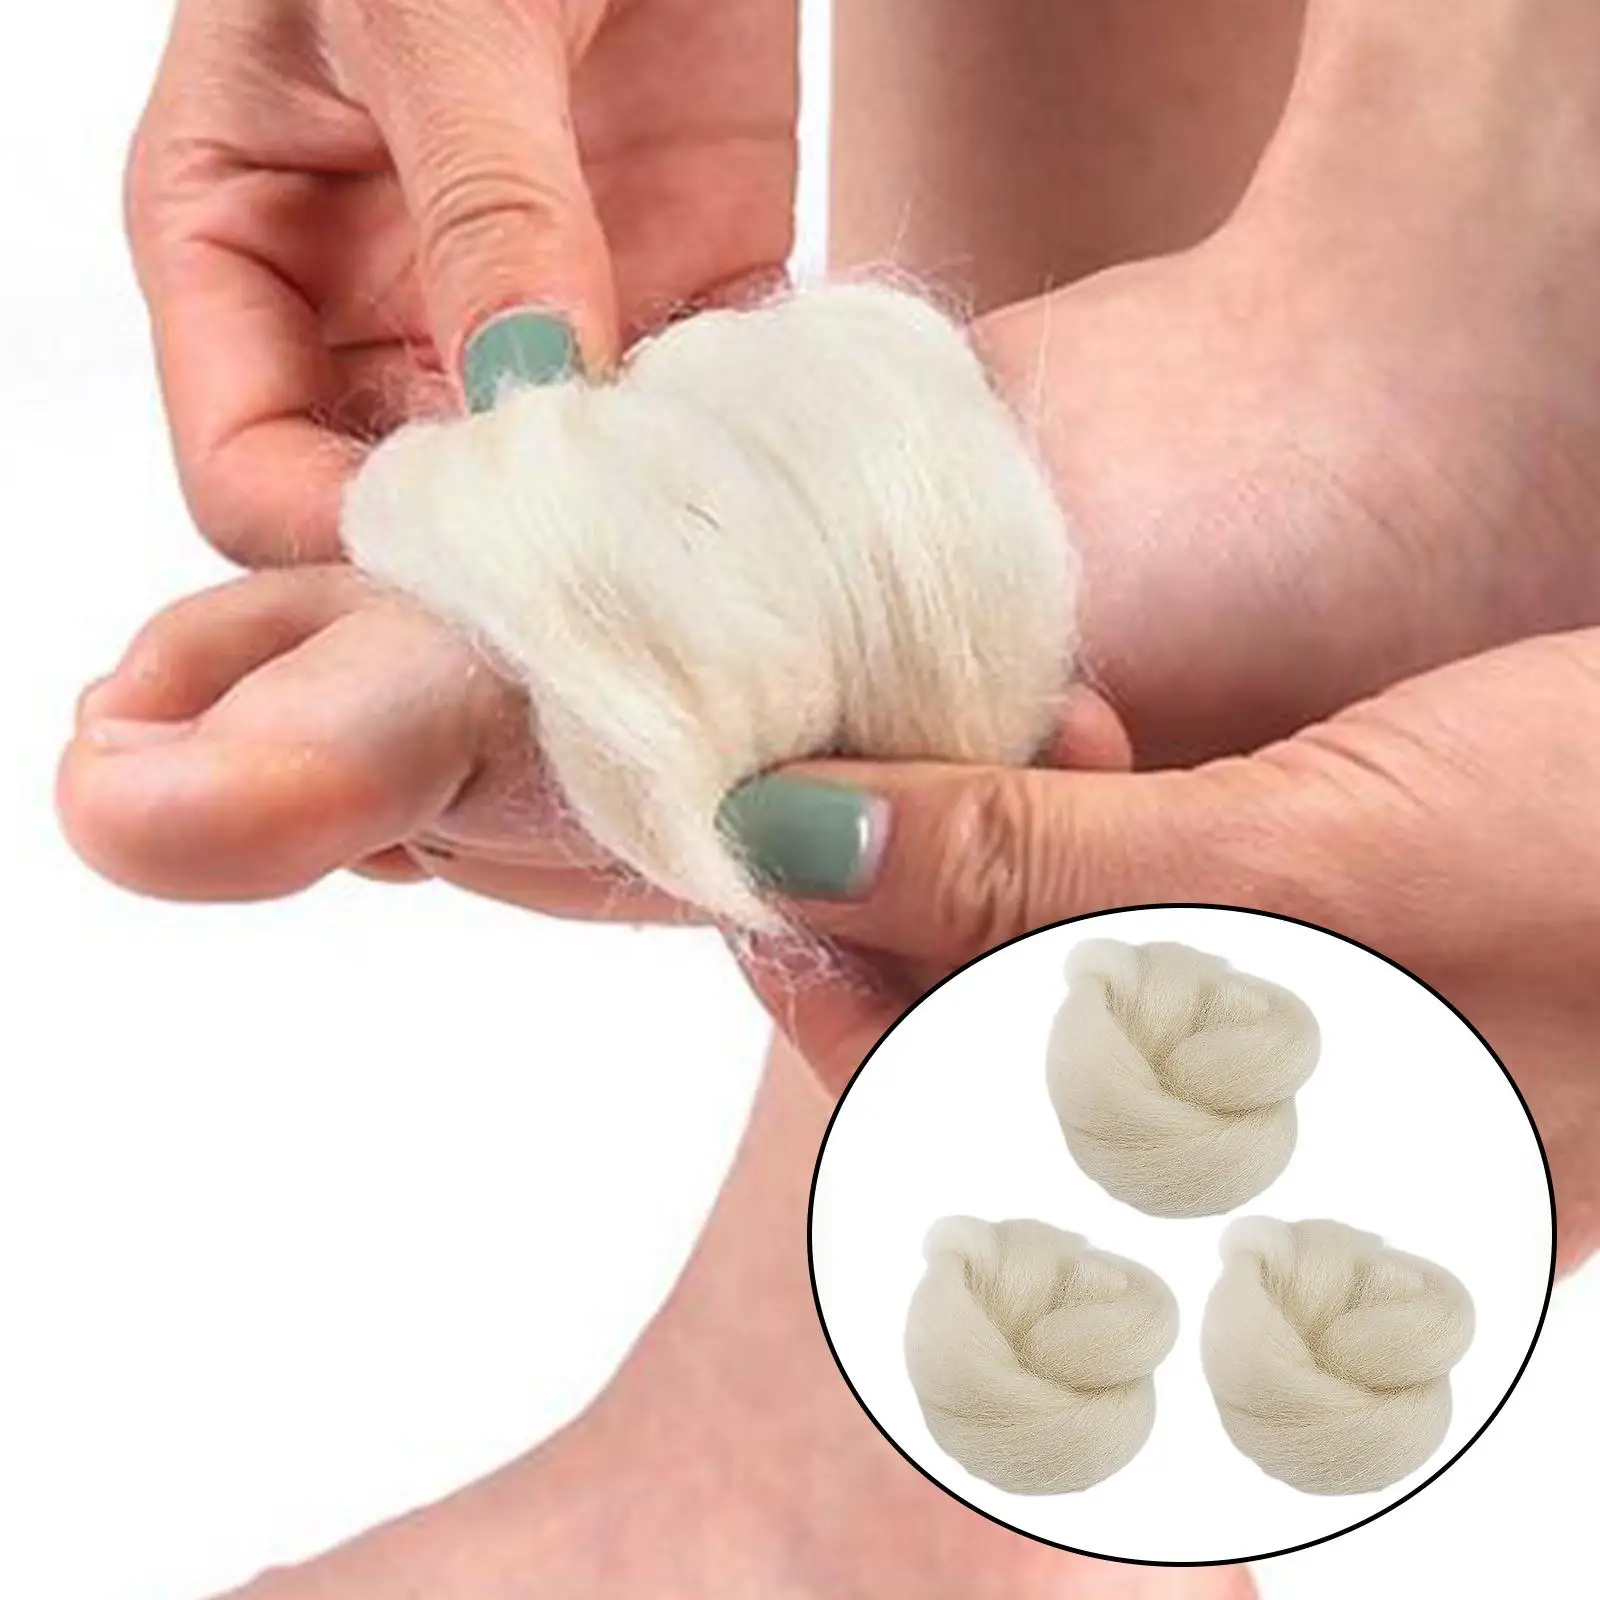 3Pcs Wool Cushioning Toe Separator Keep Your Feet Dry Accessories Reduce Blisters